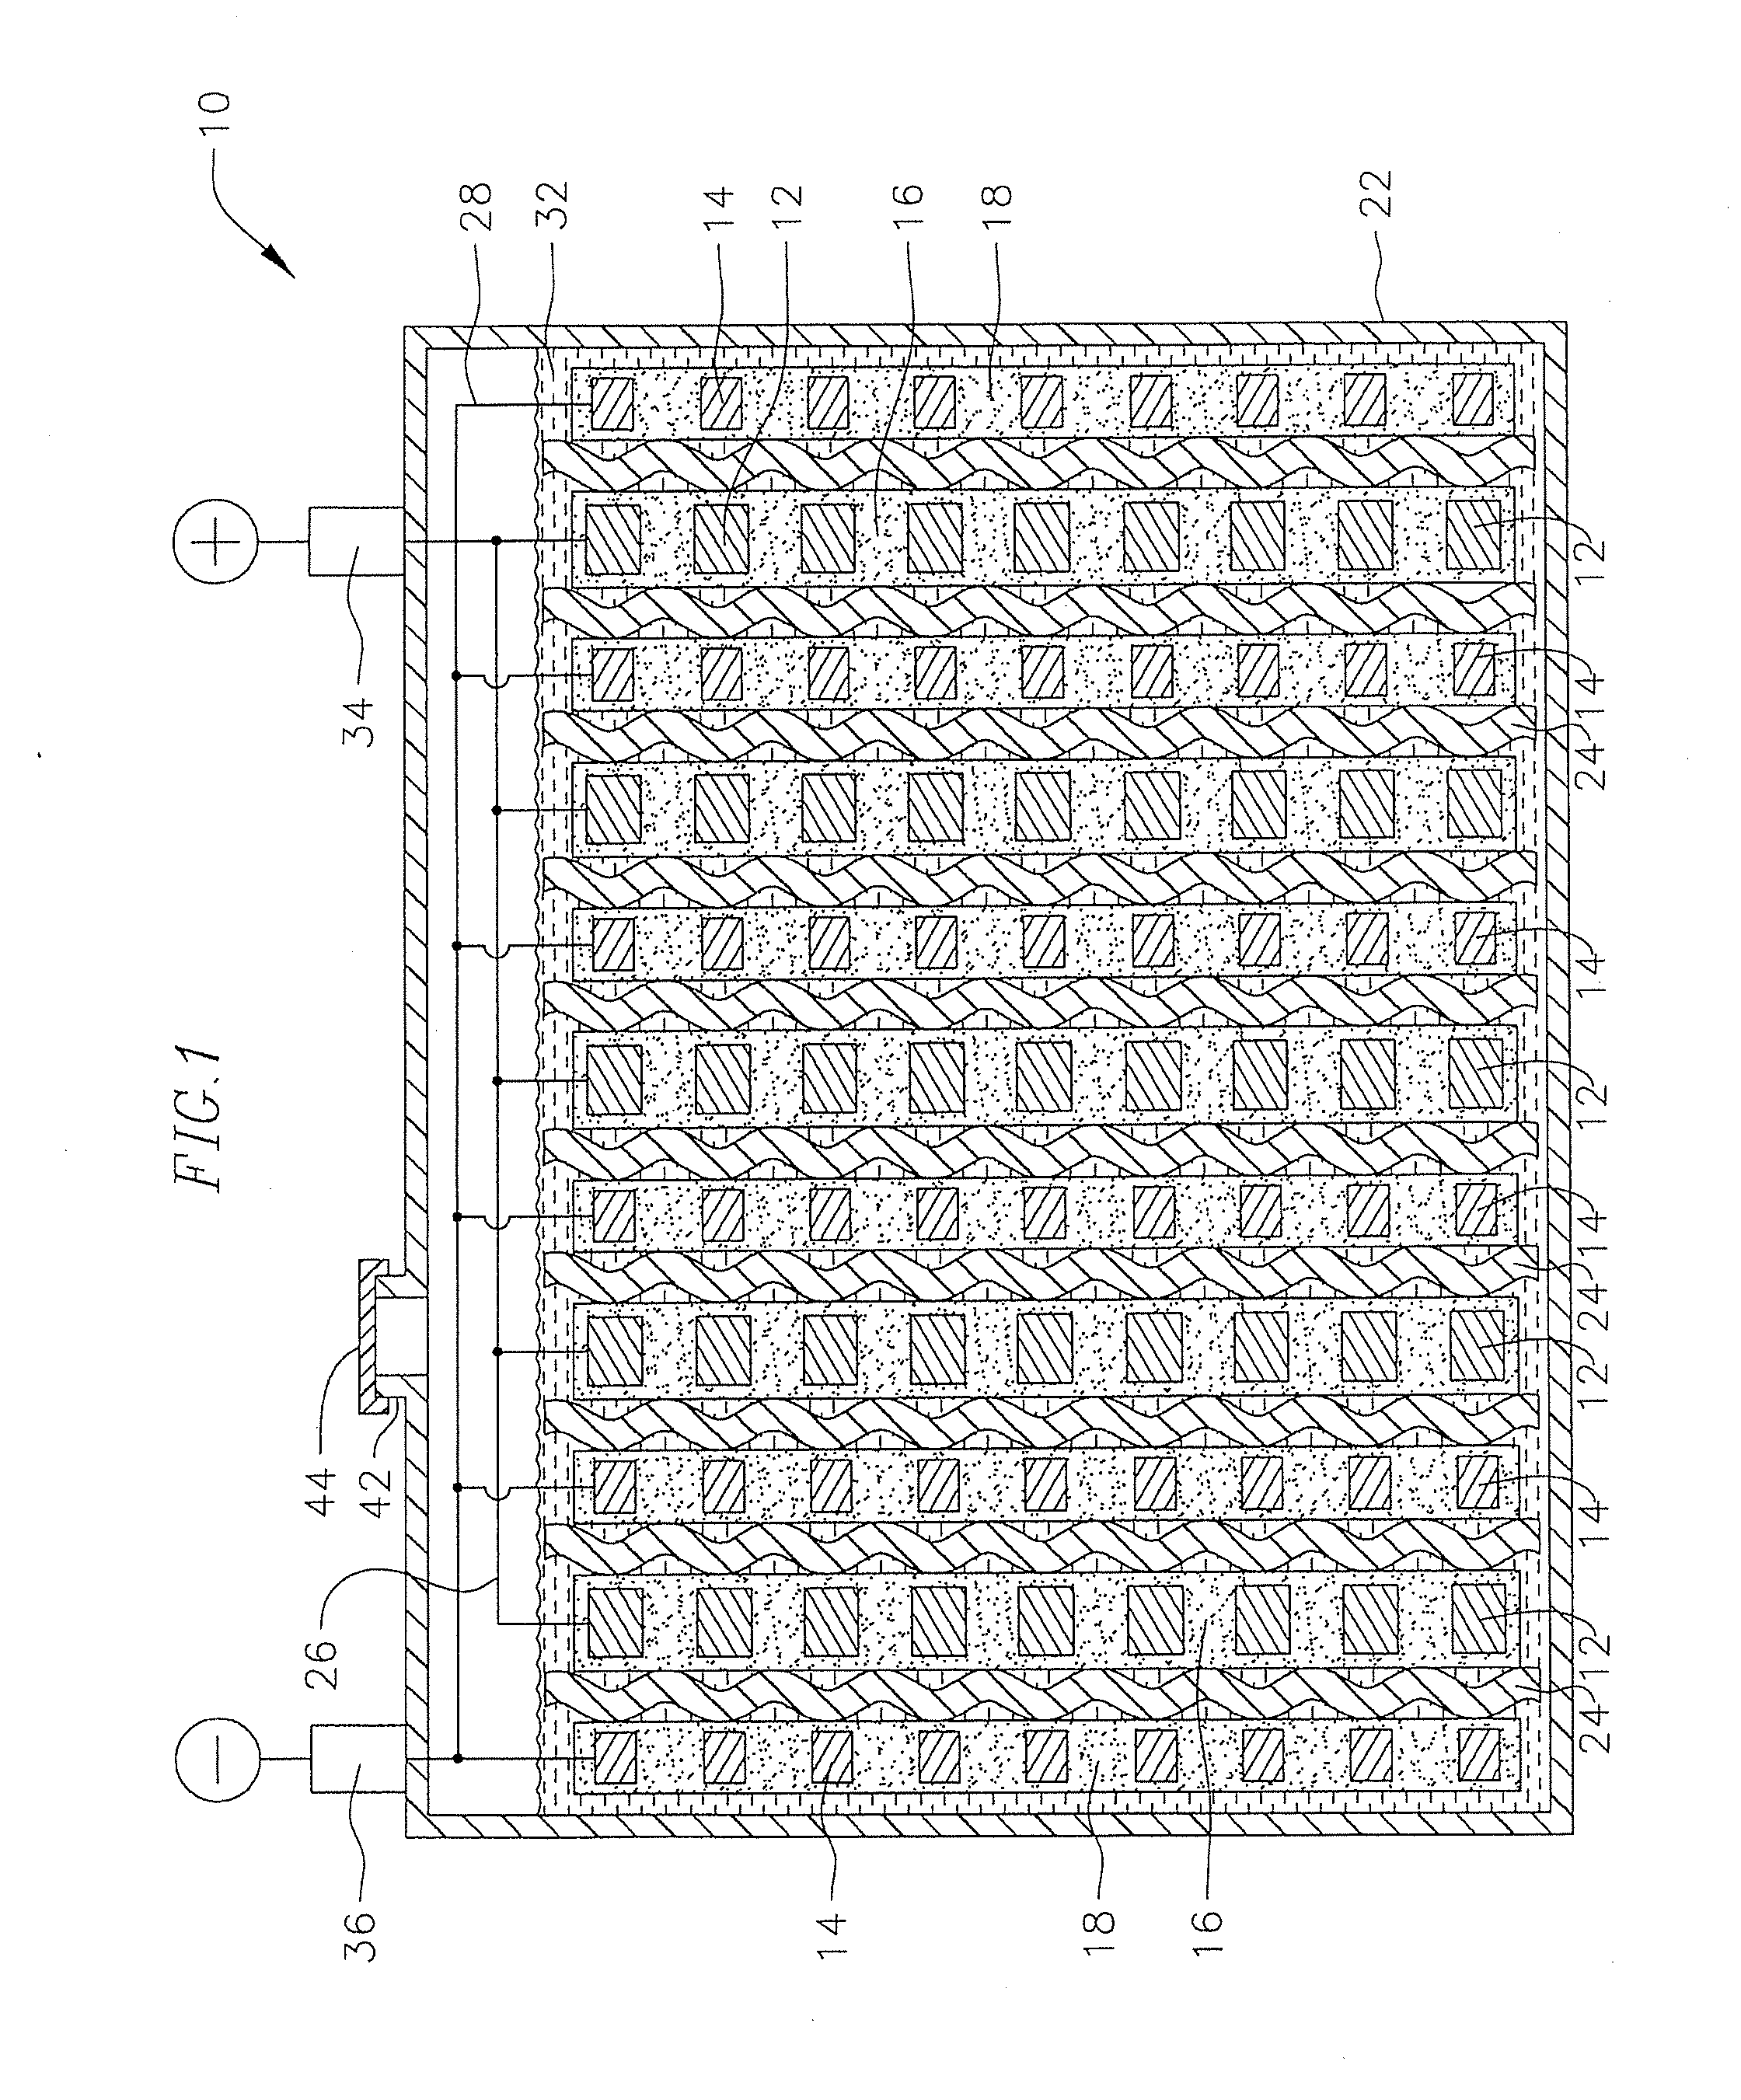 Positive active material for a lead-acid battery